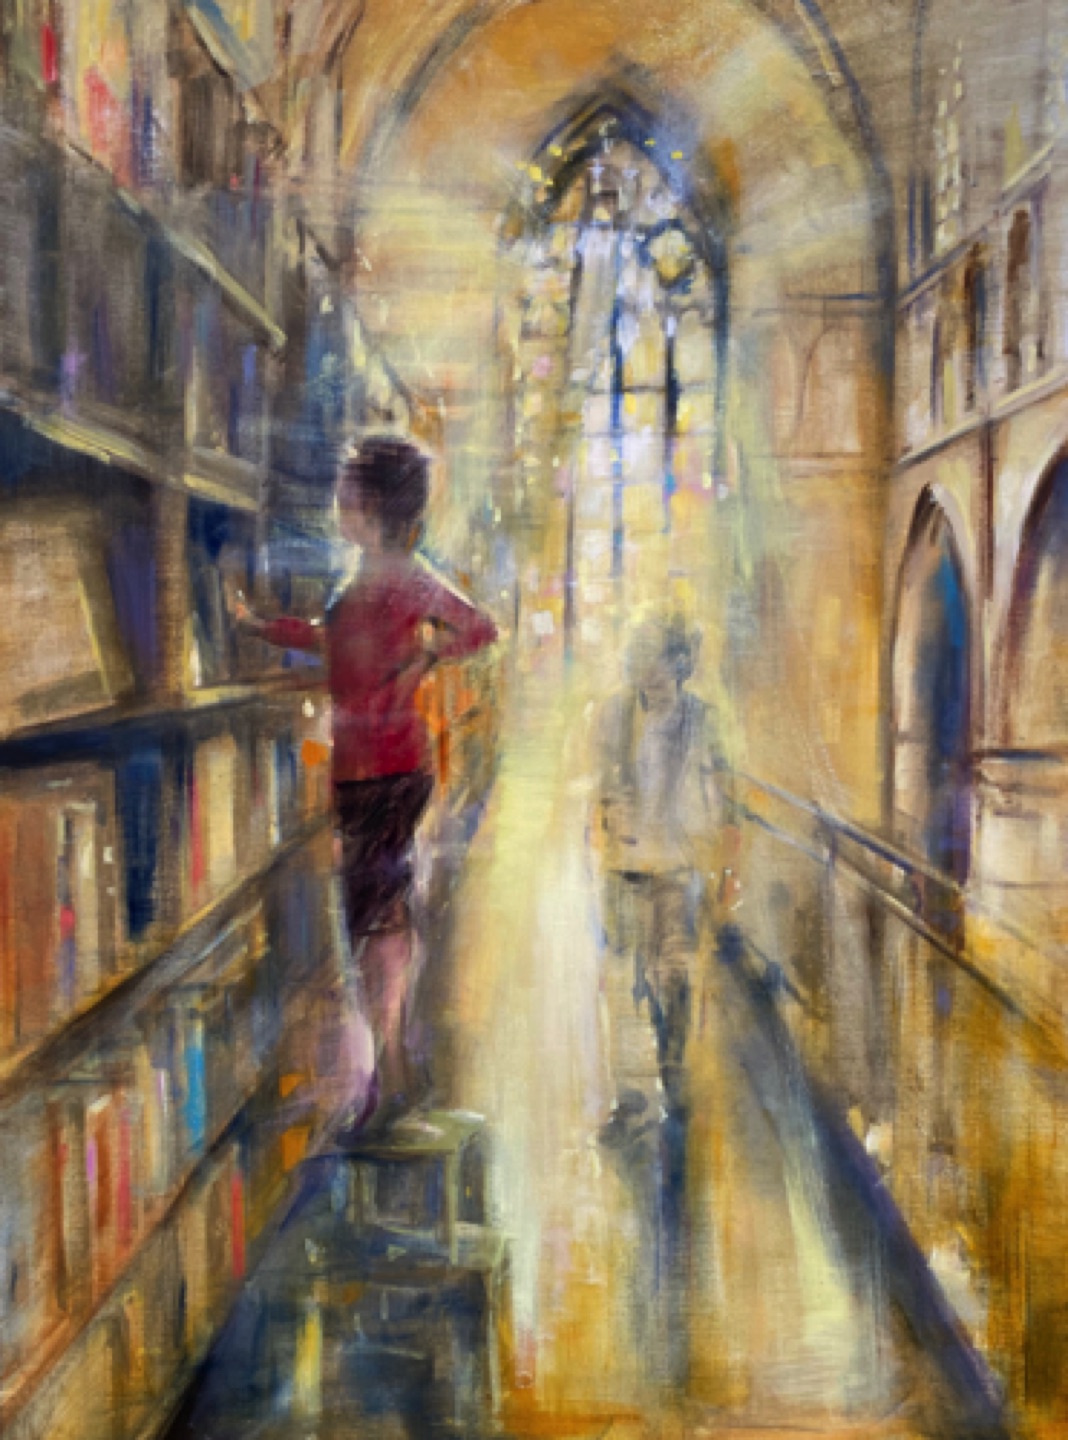 Gregg Chadwick
Carpe Librum (Maastricht)
48"x36"oil on linen 2021
Private Collection, Los Angeles, California

A magnificent bookstore in Maastricht, The Netherlands (Boekhandel Dominicanen) continues to inspire new artworks.